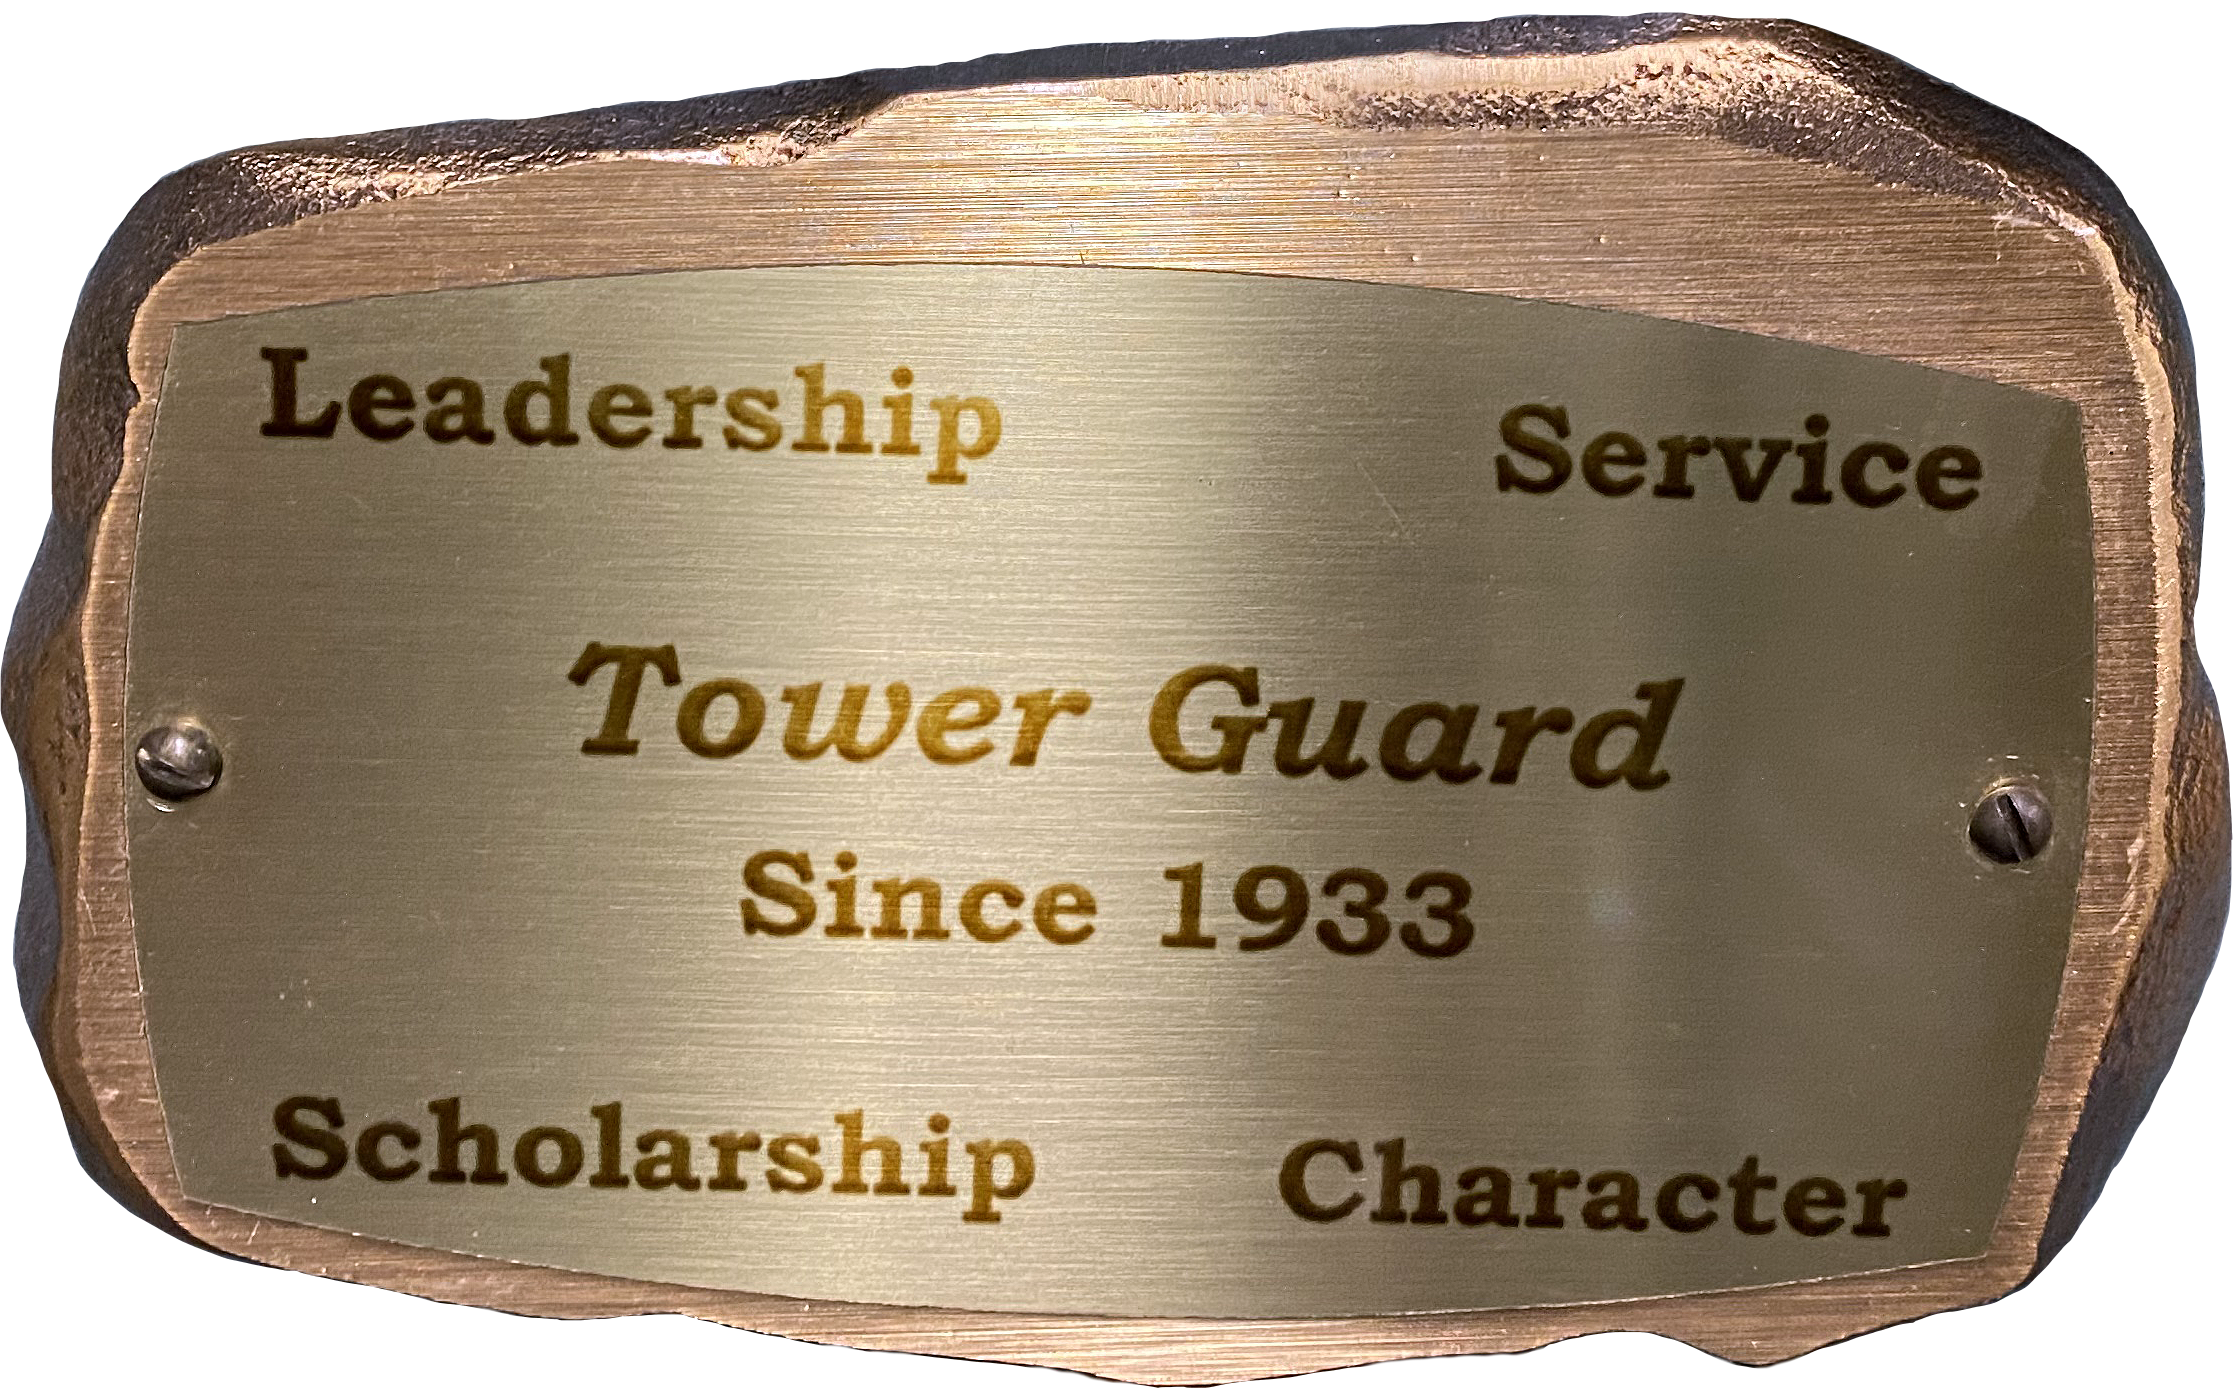 Inscribed bronze plaque in the shape of a rock with text on it reading: "Leadership, Service, Tower Guard, Since 1933, Scholarship, Character"